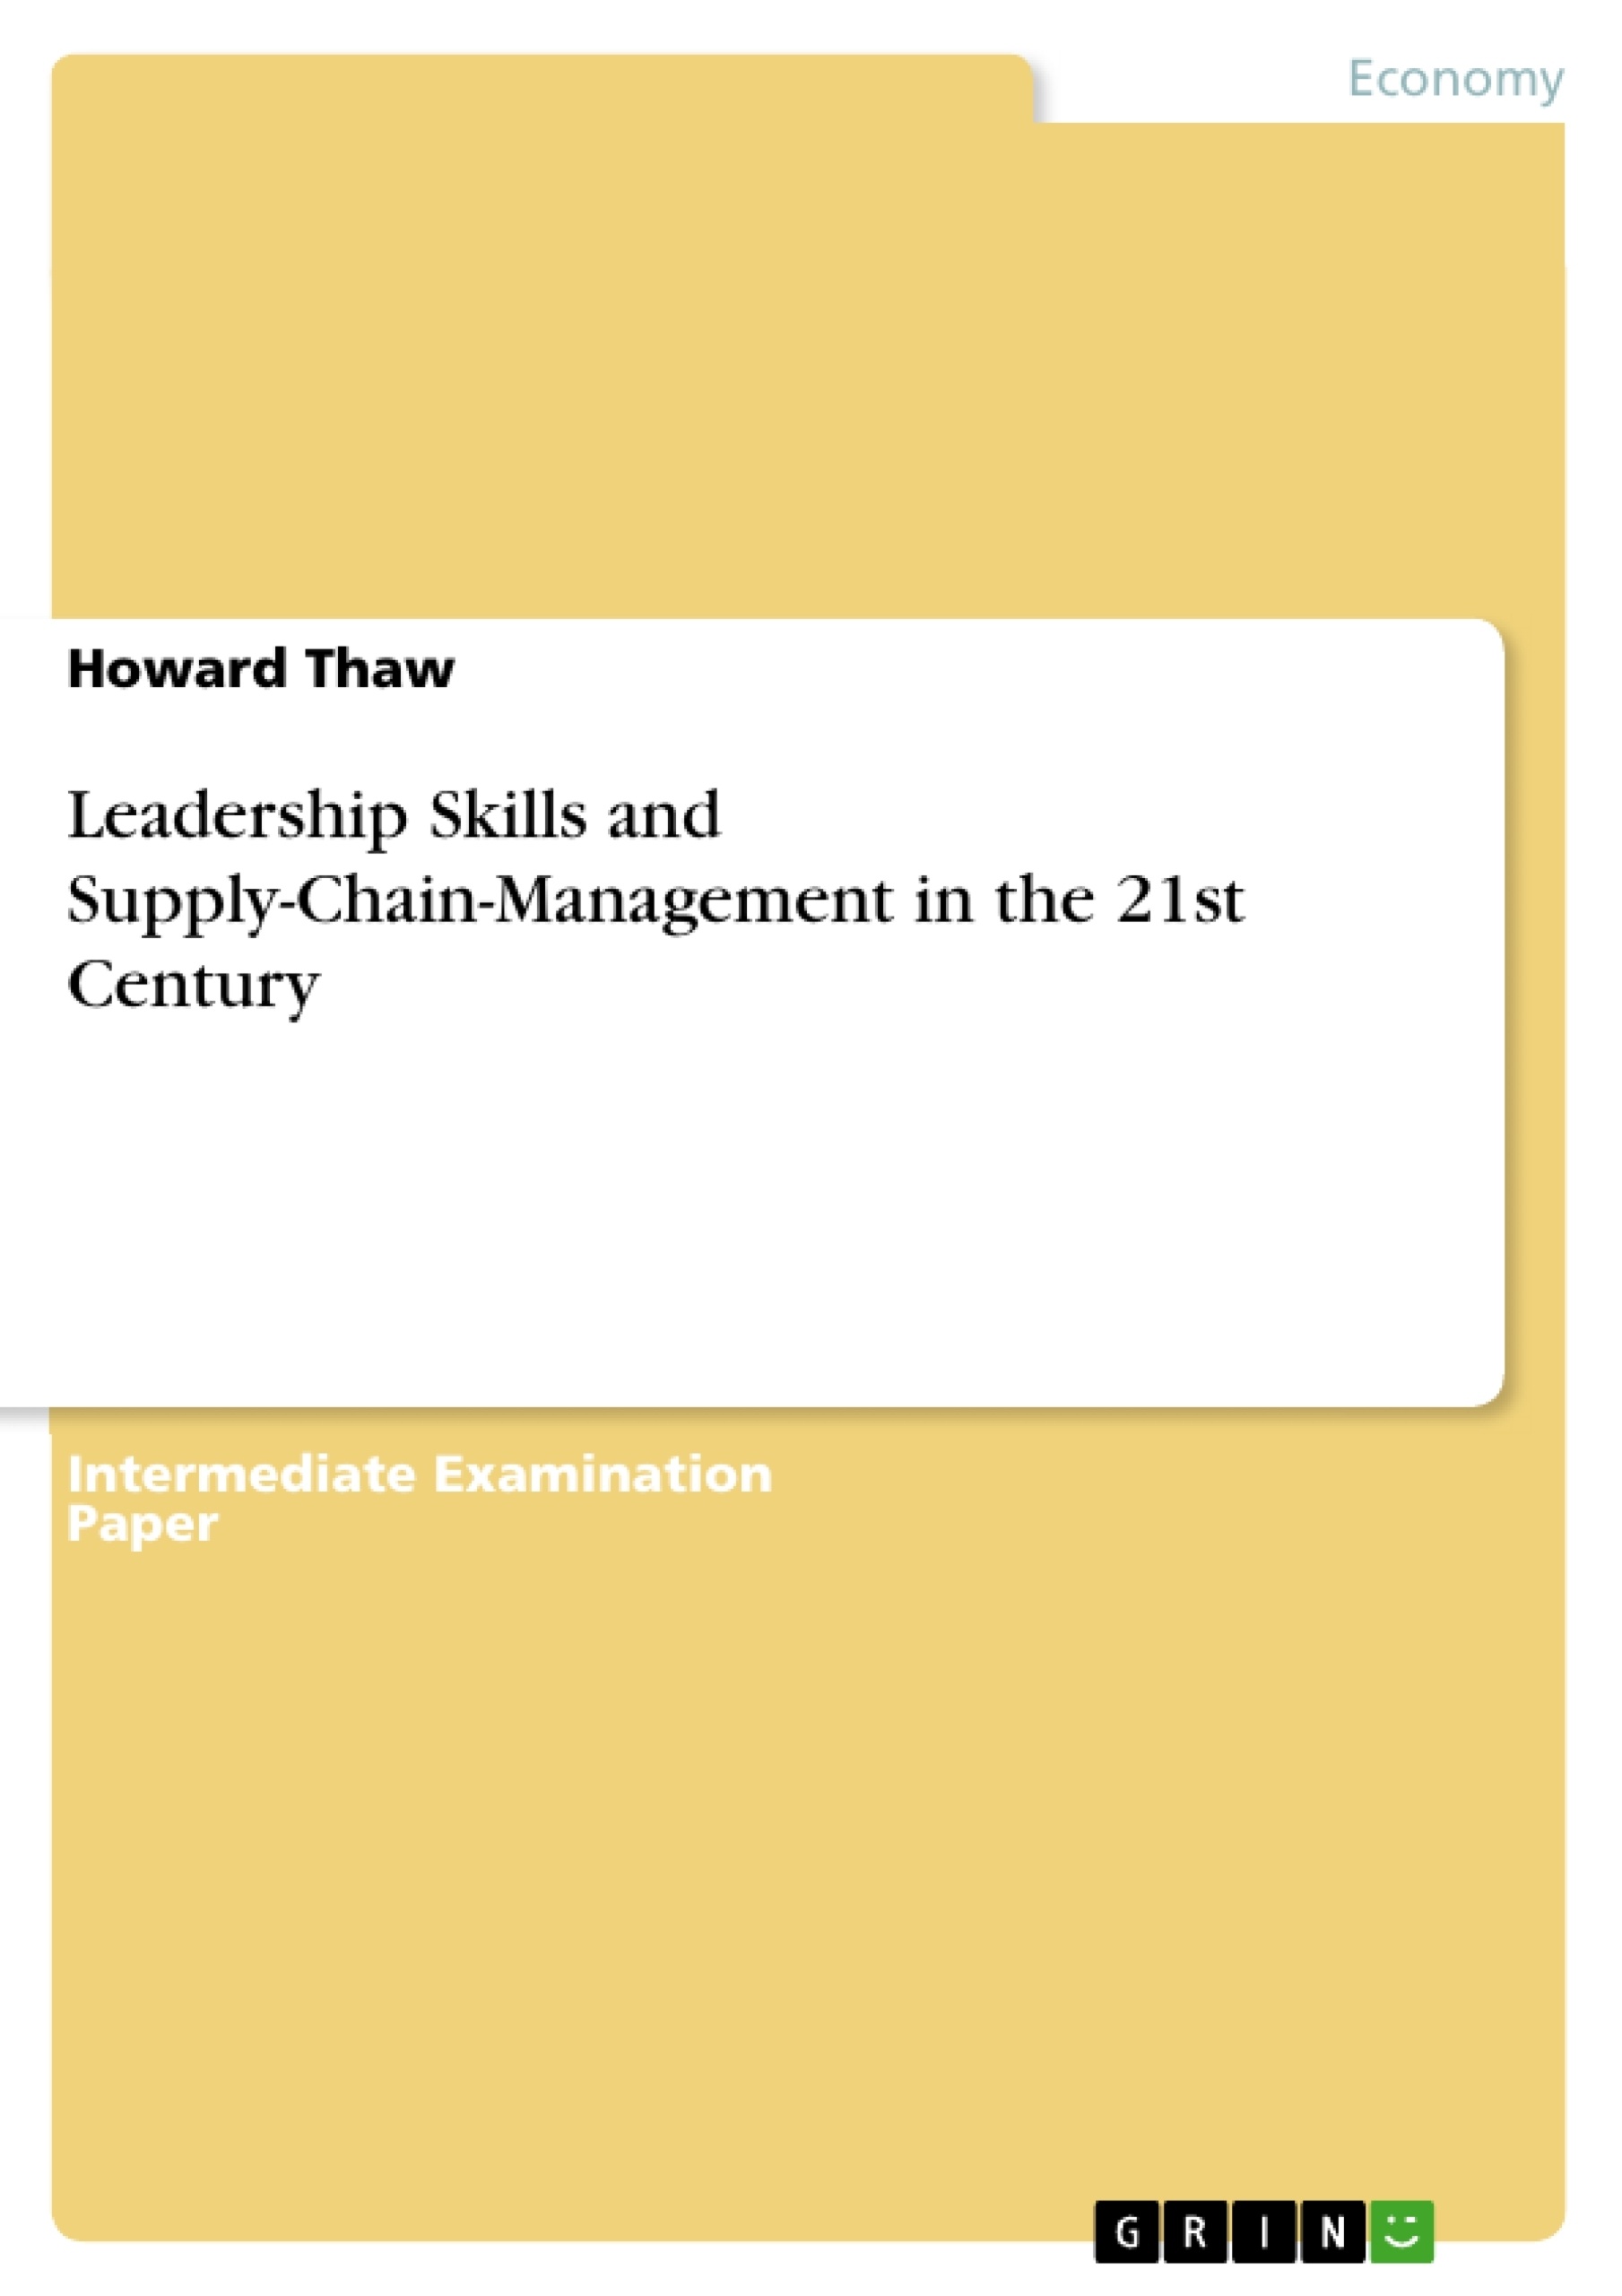 Titre: Leadership Skills and Supply-Chain-Management in the 21st Century